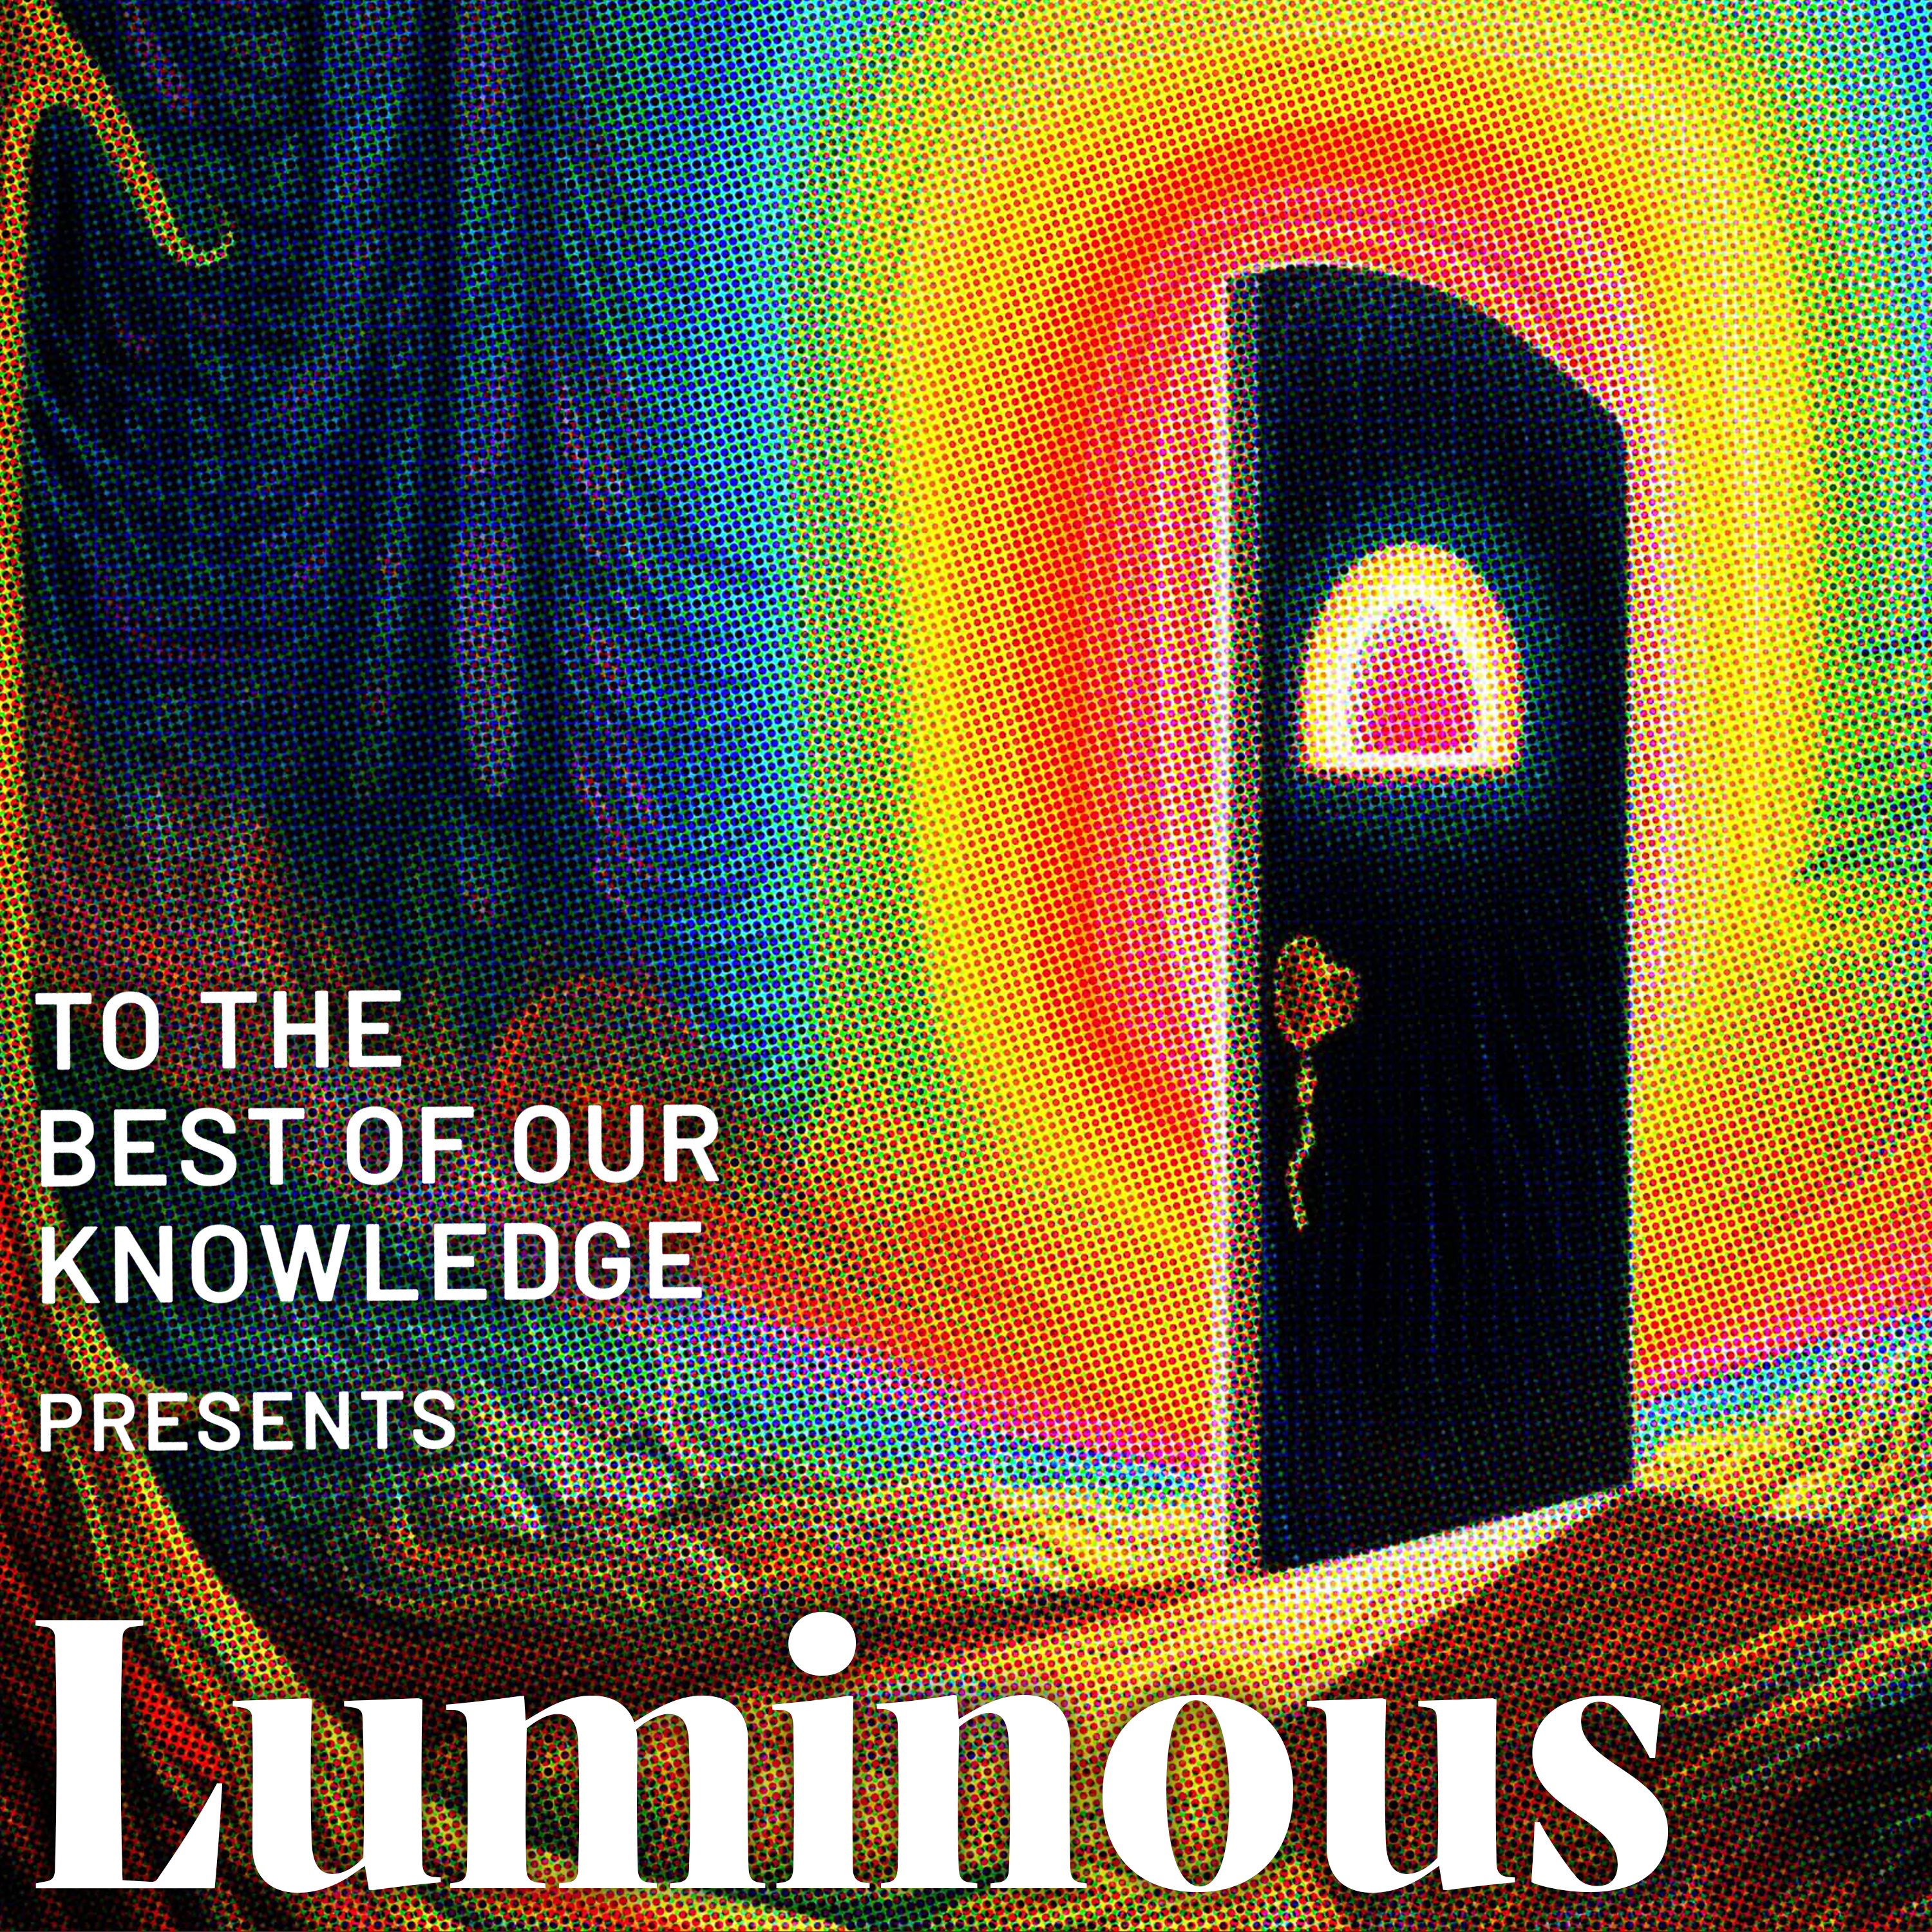 Luminous: What Can Psychedelics Teach Us About Dying?